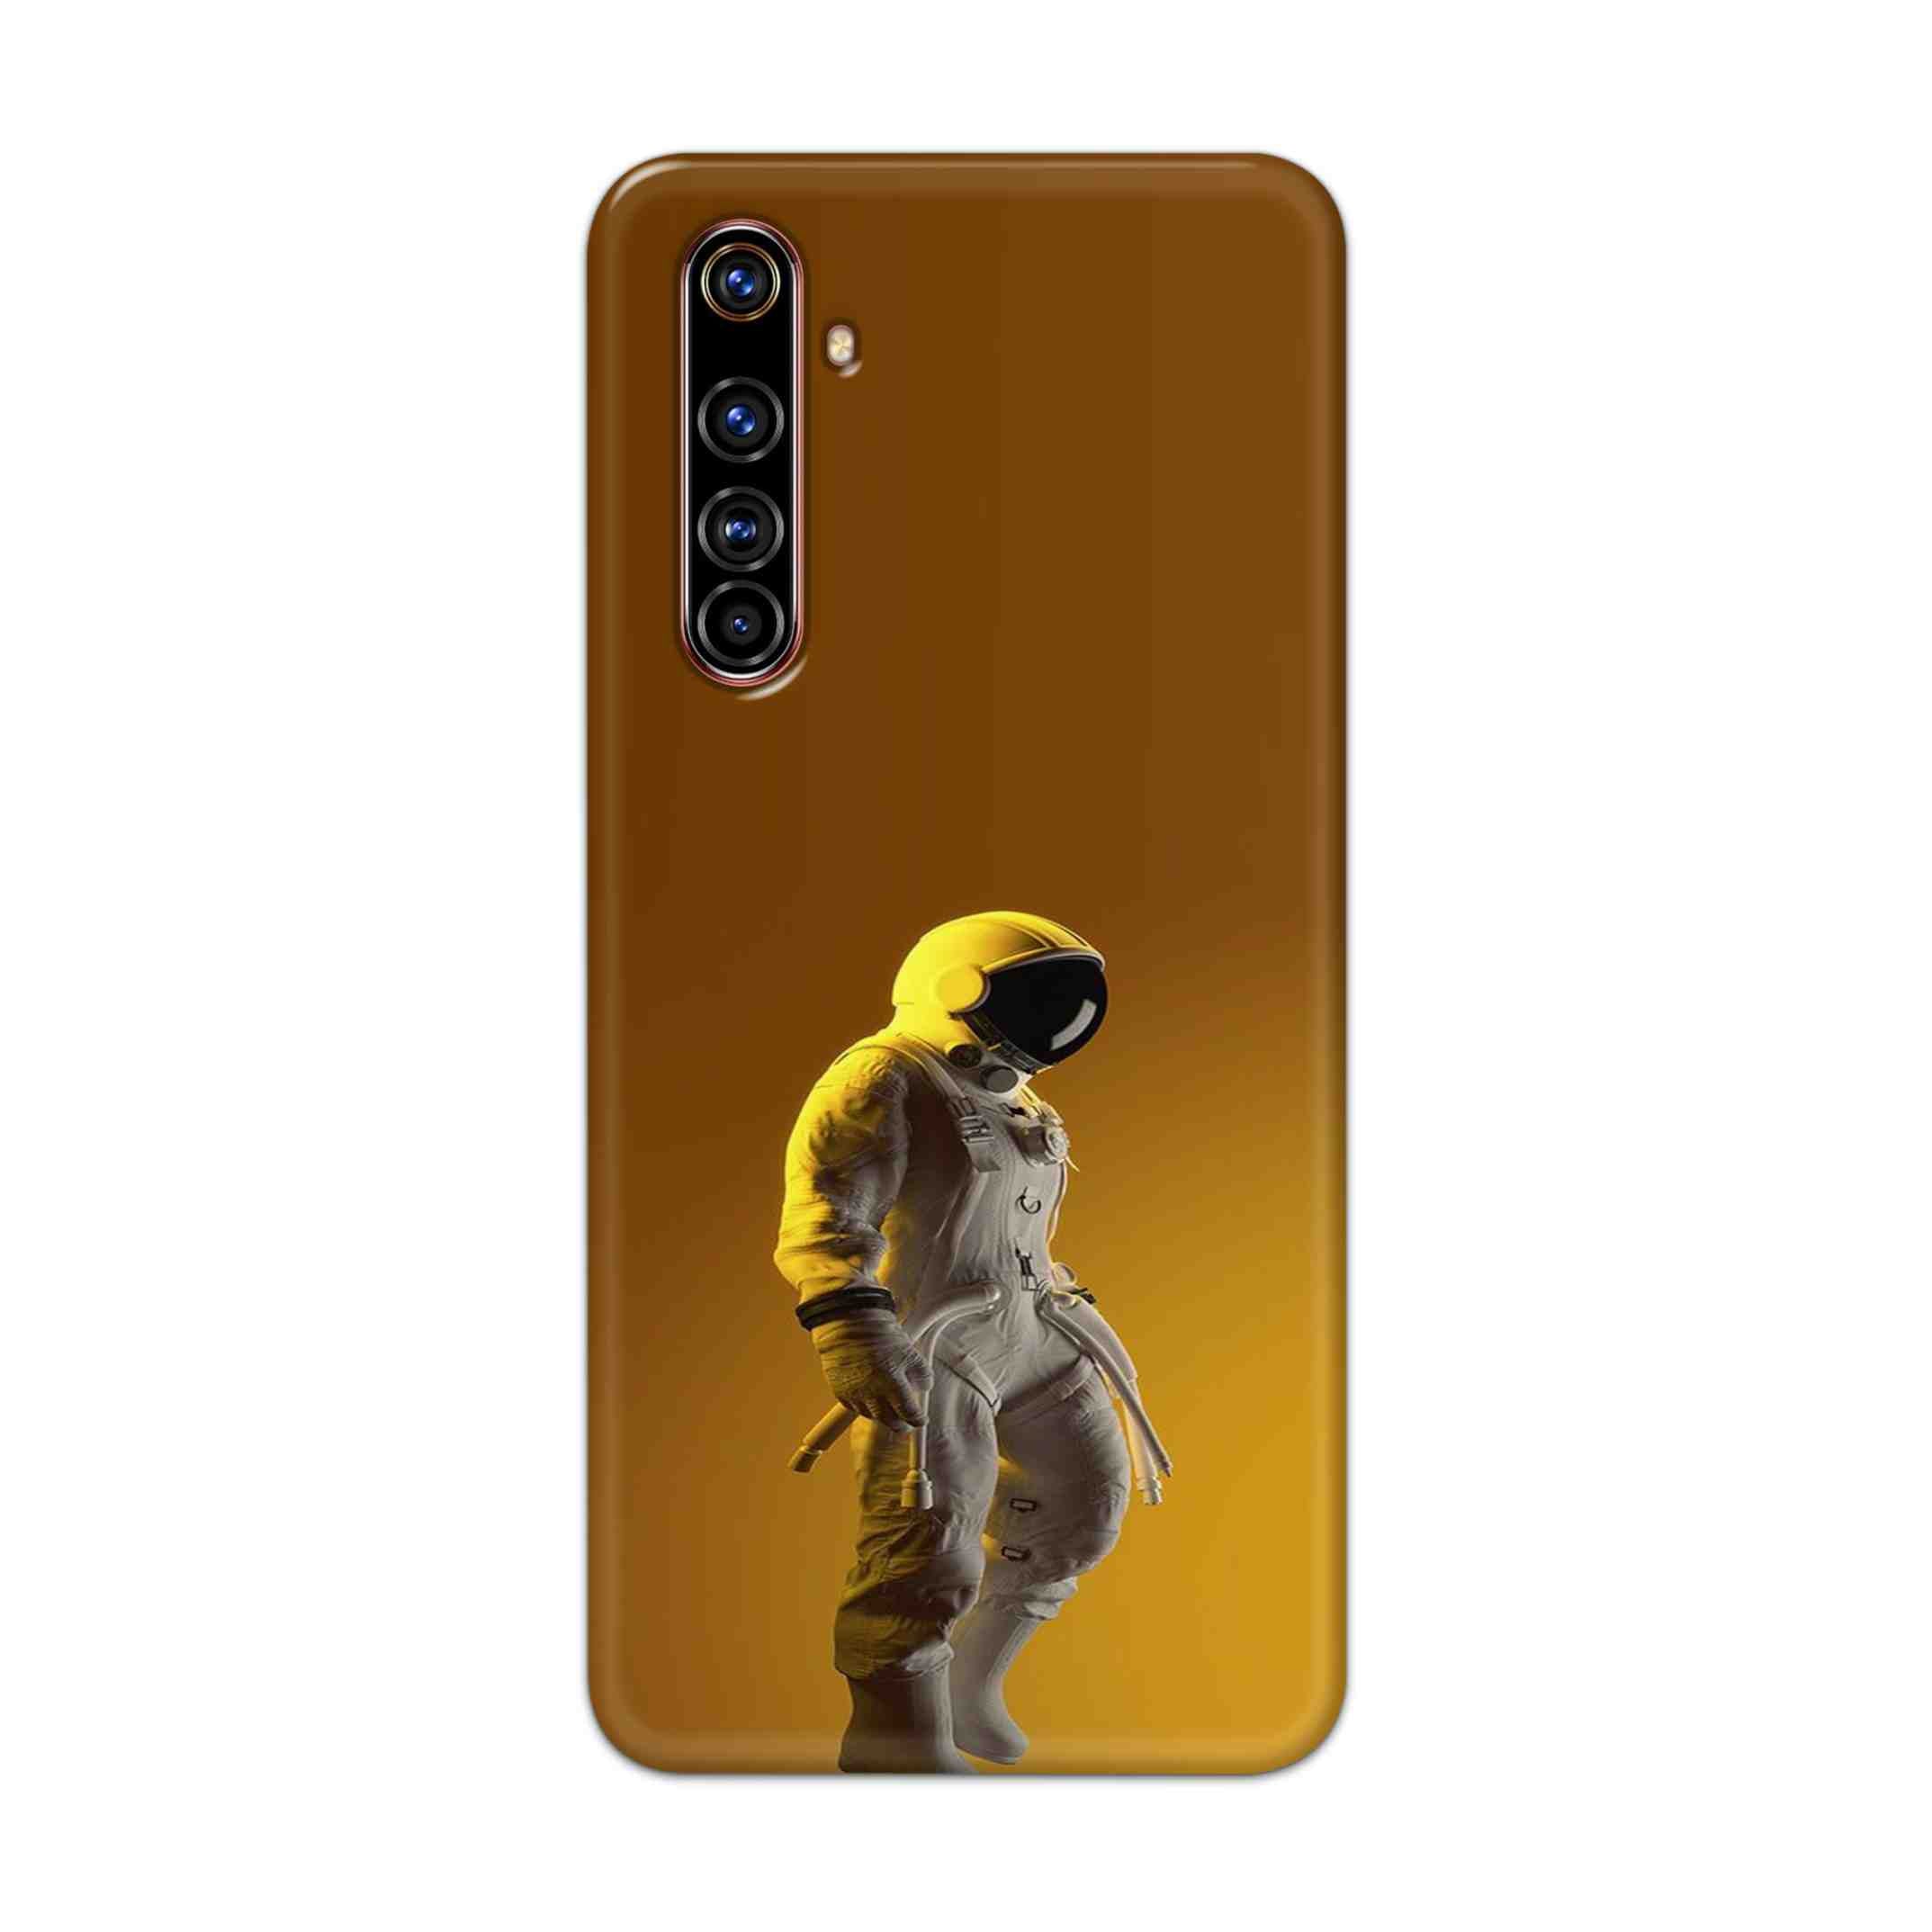 Buy Yellow Astronaut Hard Back Mobile Phone Case Cover For Realme X50 Pro Online